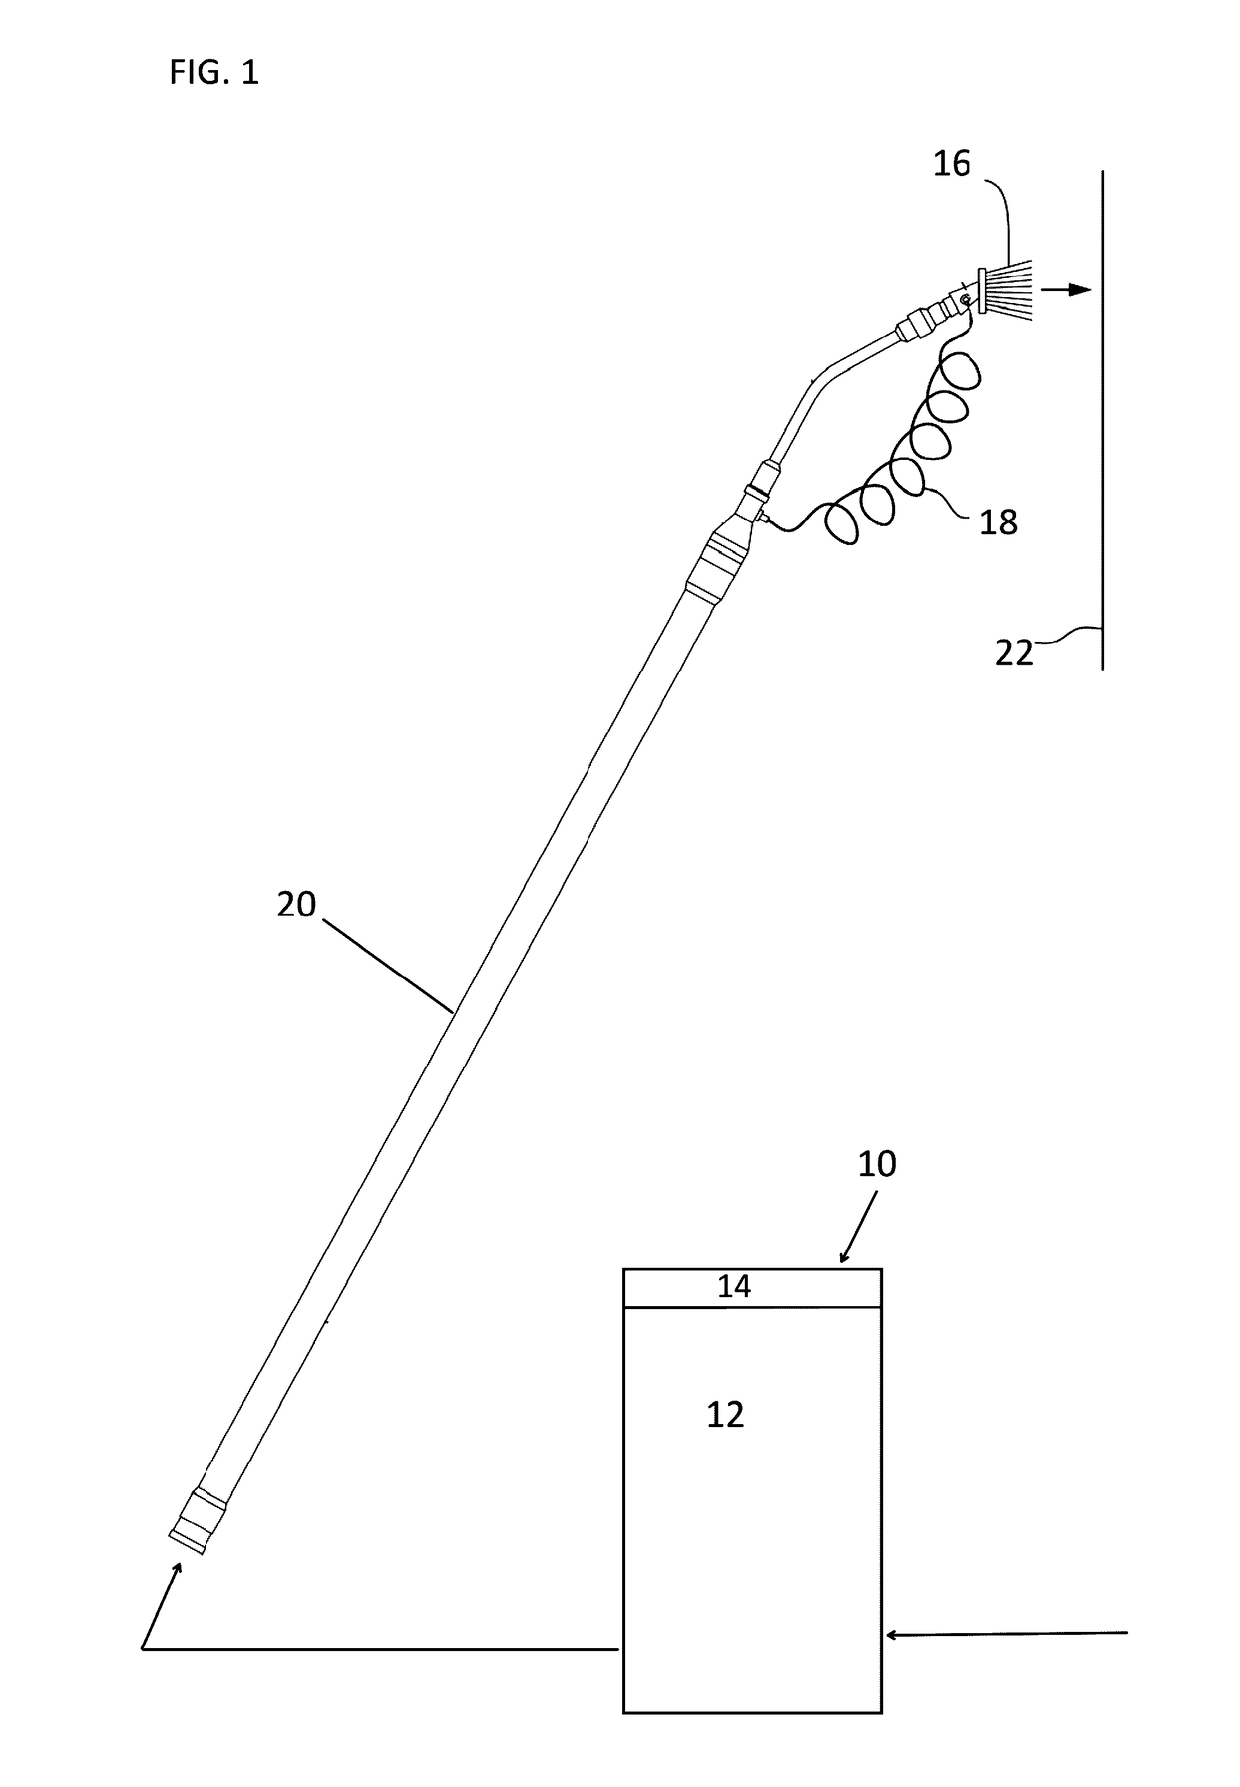 Fluid conditioning systems having caps with filter cartridge sealing and removal devices and/or locking devices